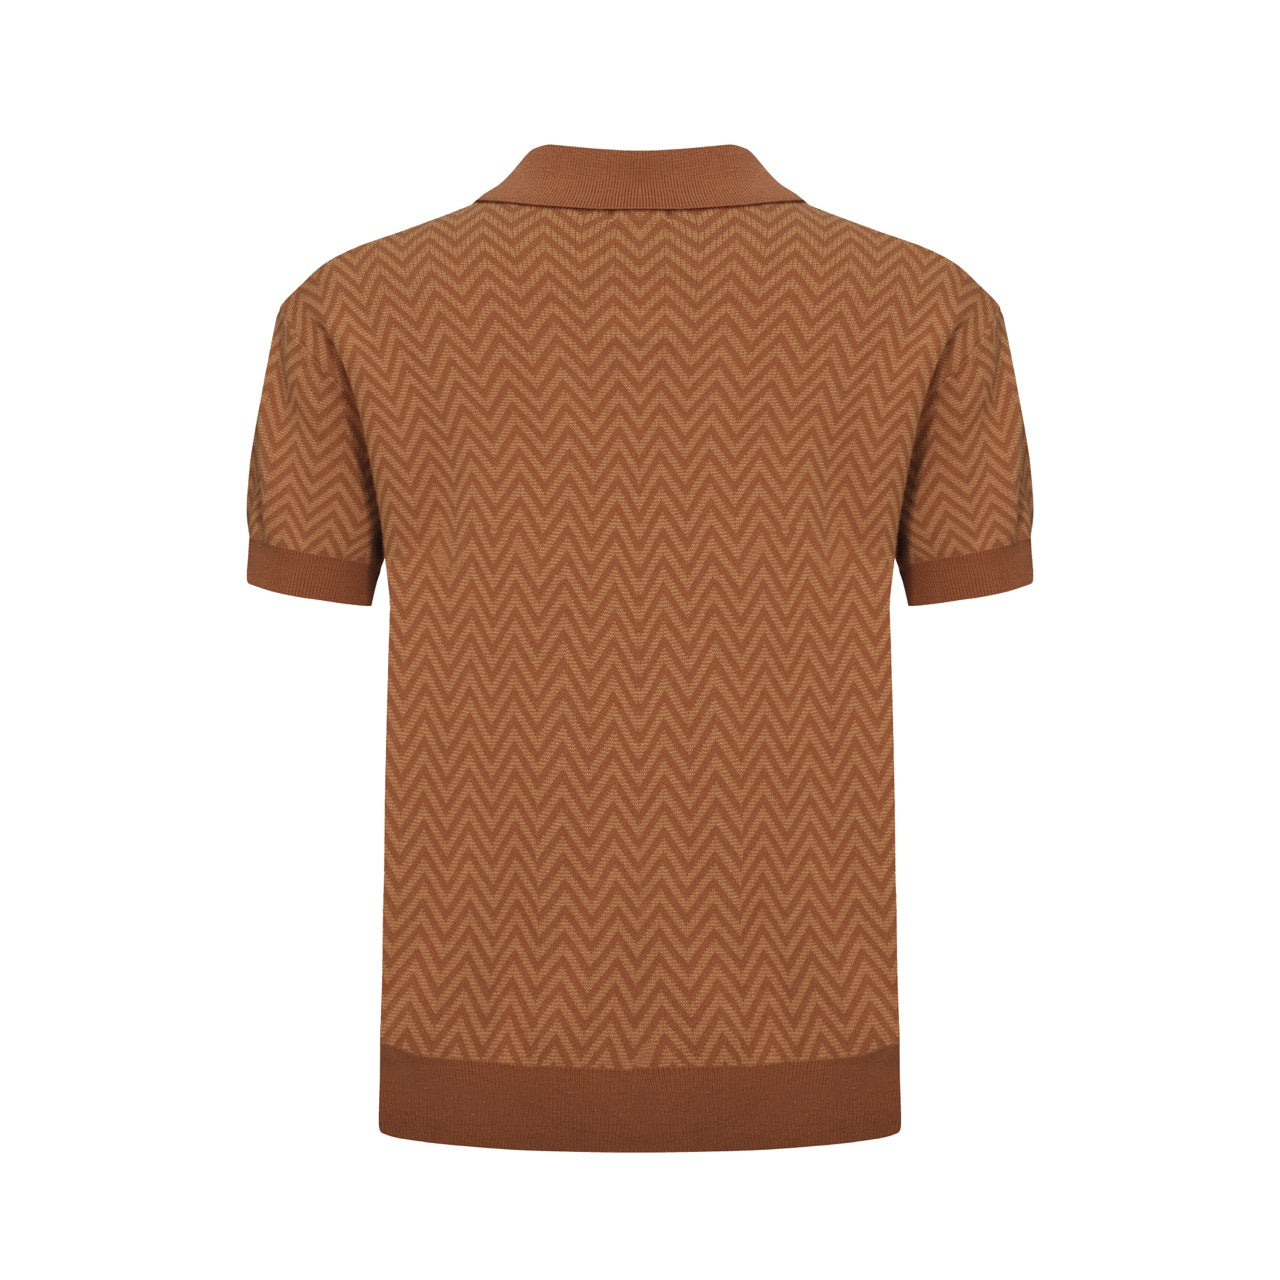 OXKNIT Men Vintage Clothing 1960s Mod Style Casual Herringbone Fine Gauge Knitted Retro Polo